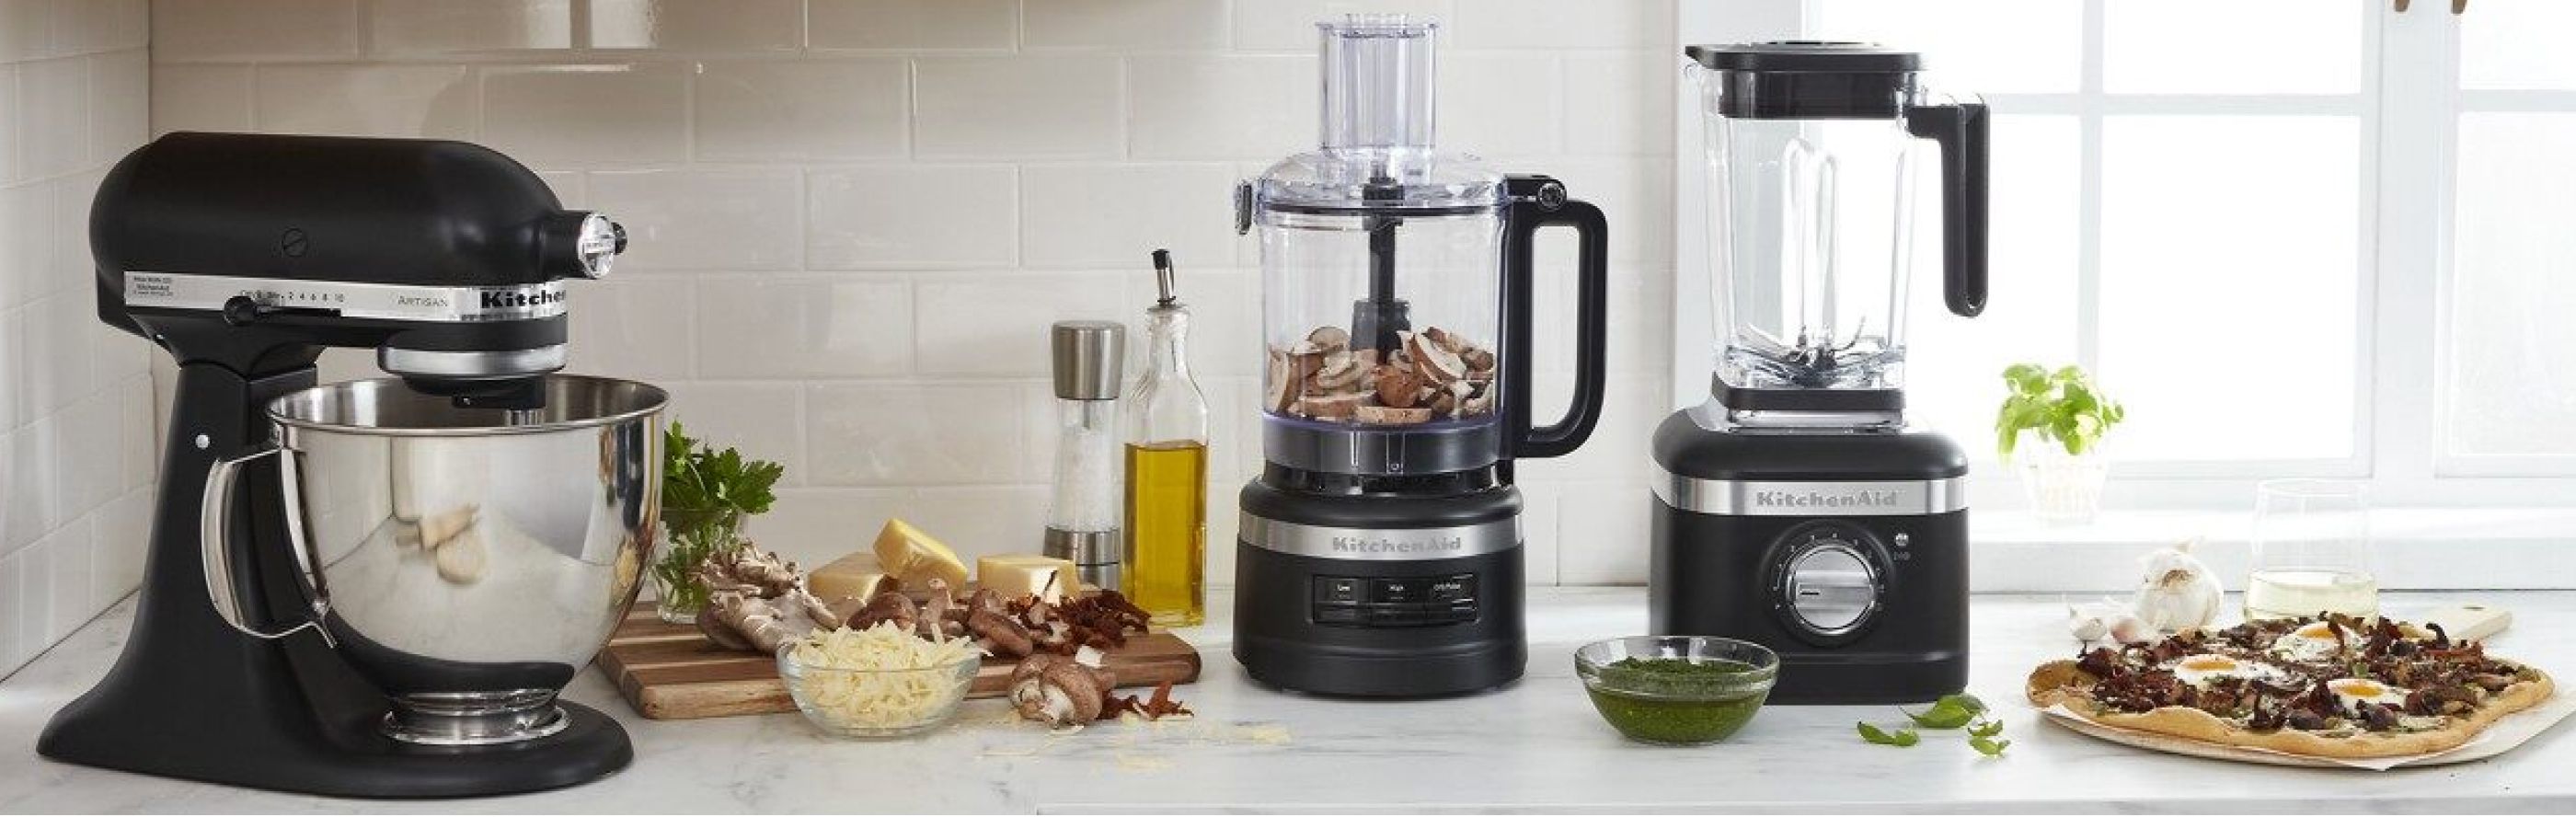 Black KitchenAid® stand mixer, food processor and blender on countertop with ingredients